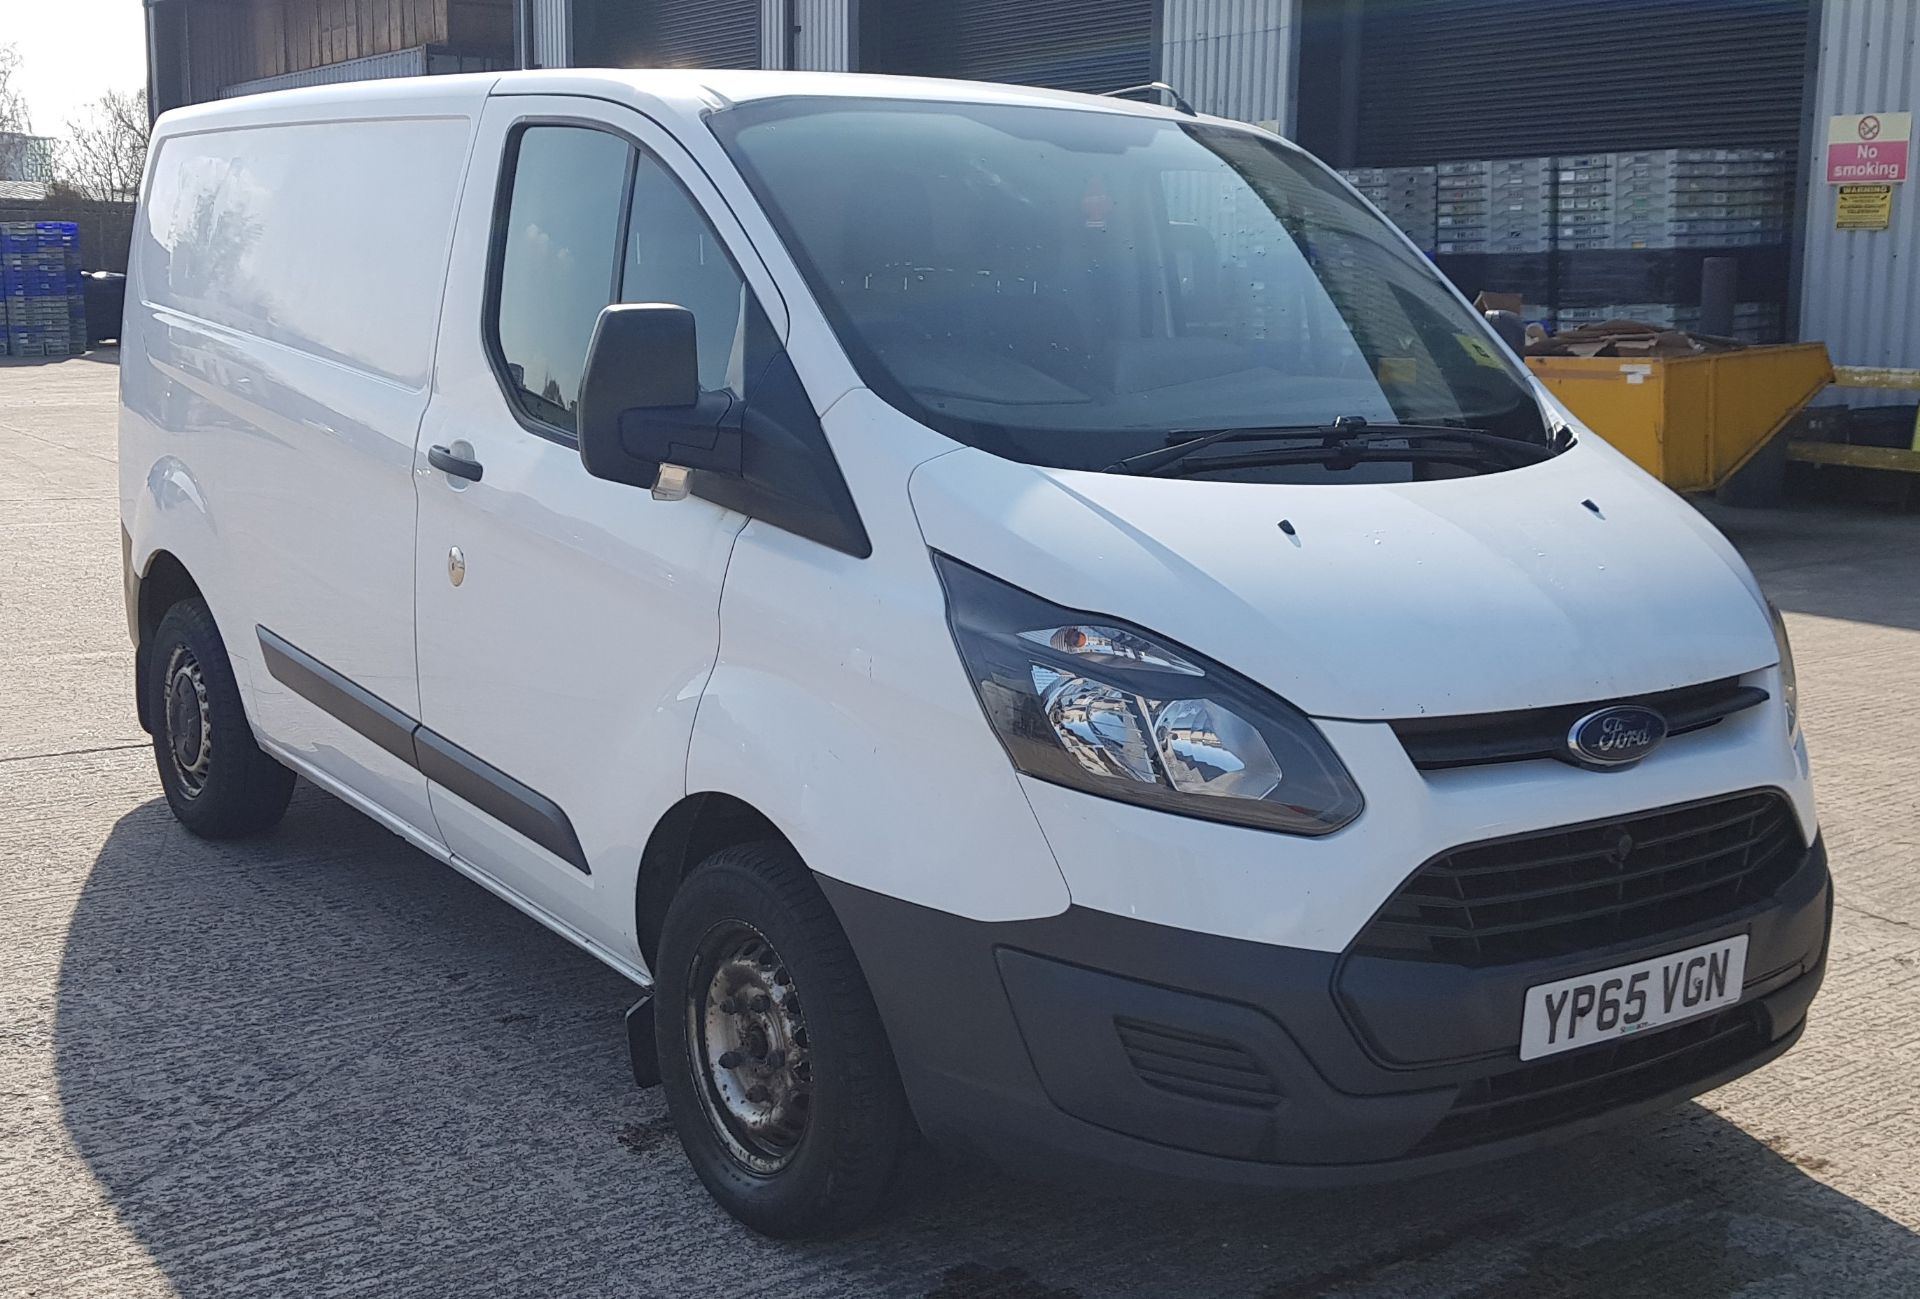 WHITE FORD TRANSIT CUSTOM 270 ECO TECH. ( DIESEL ) Reg : YP65 VGN, Mileage : 93,455 Details: FIRST